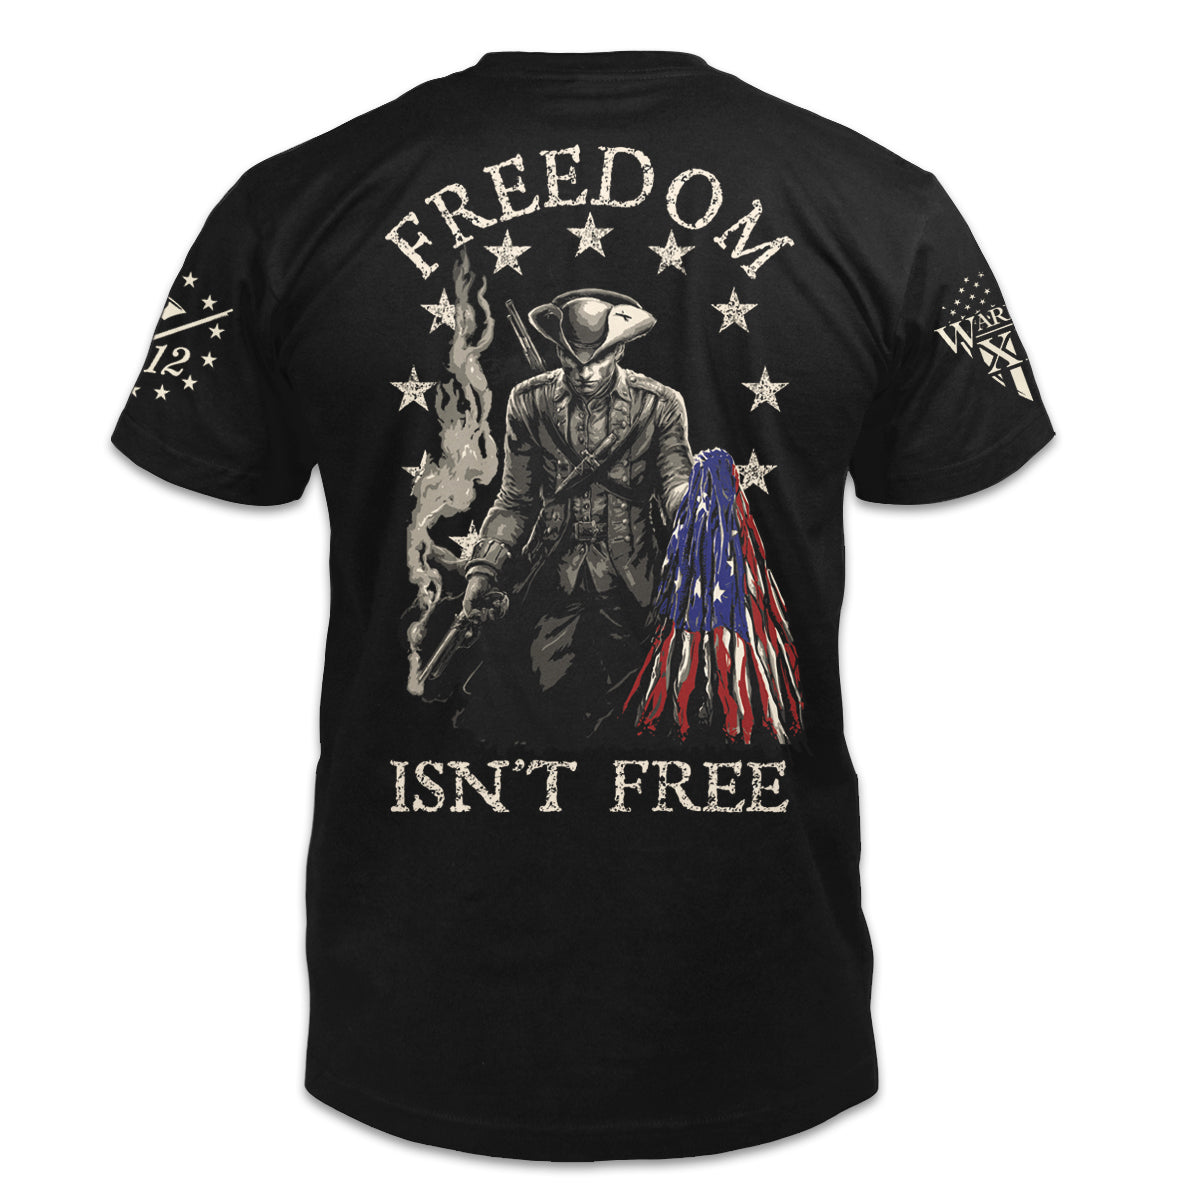 A black t-shirt  pays tribute to the Minuteman, the original American Patriot, and our forefathers who fought relentlessly against the tyranny of Britain.The back of the shirt has an infaltry soldier holding a ripped USA flag printed on it.